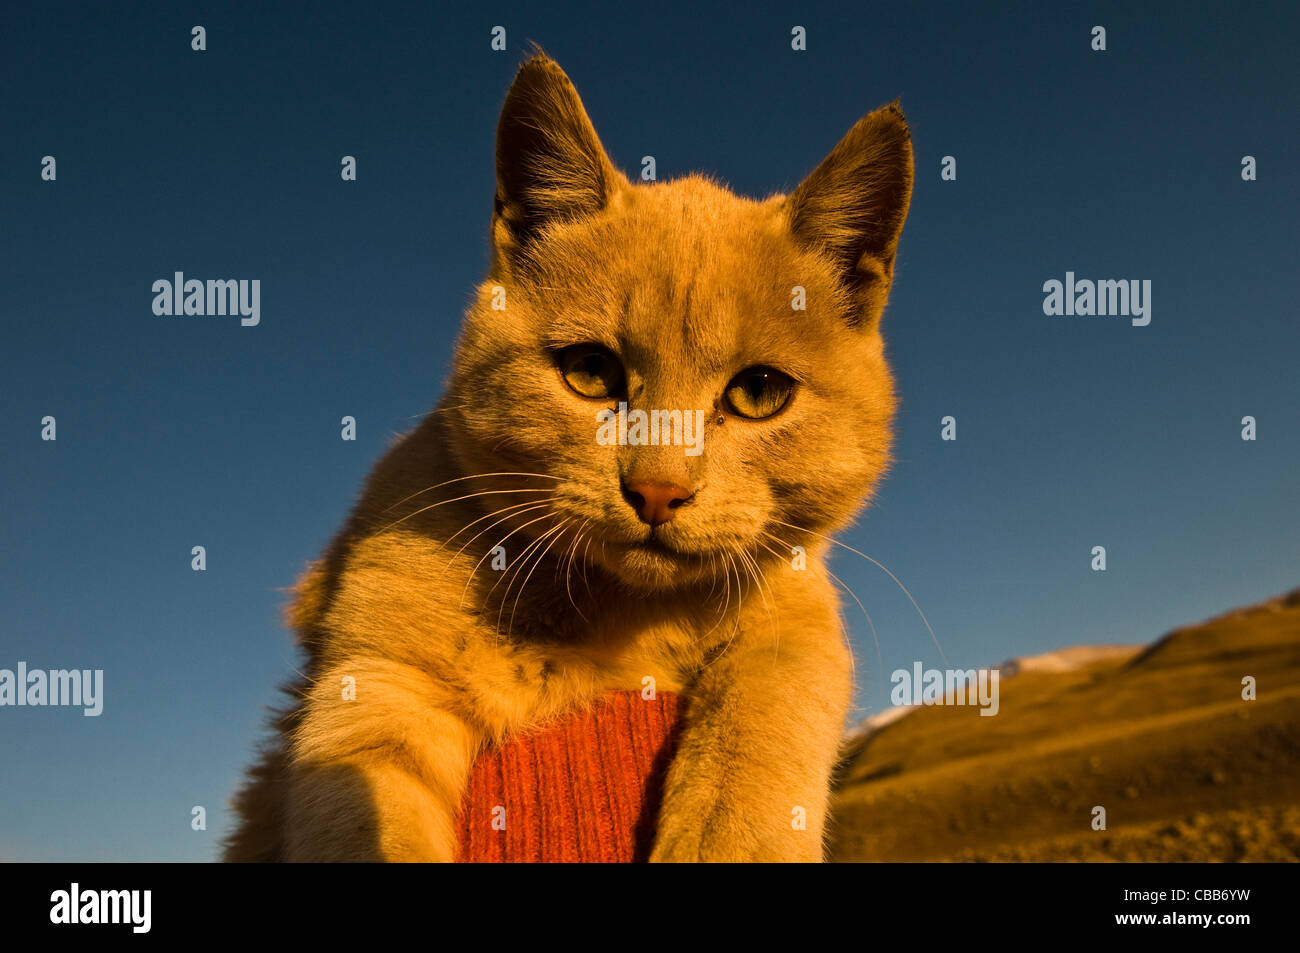 A cute Kitty cat held in the air. Stock Photo